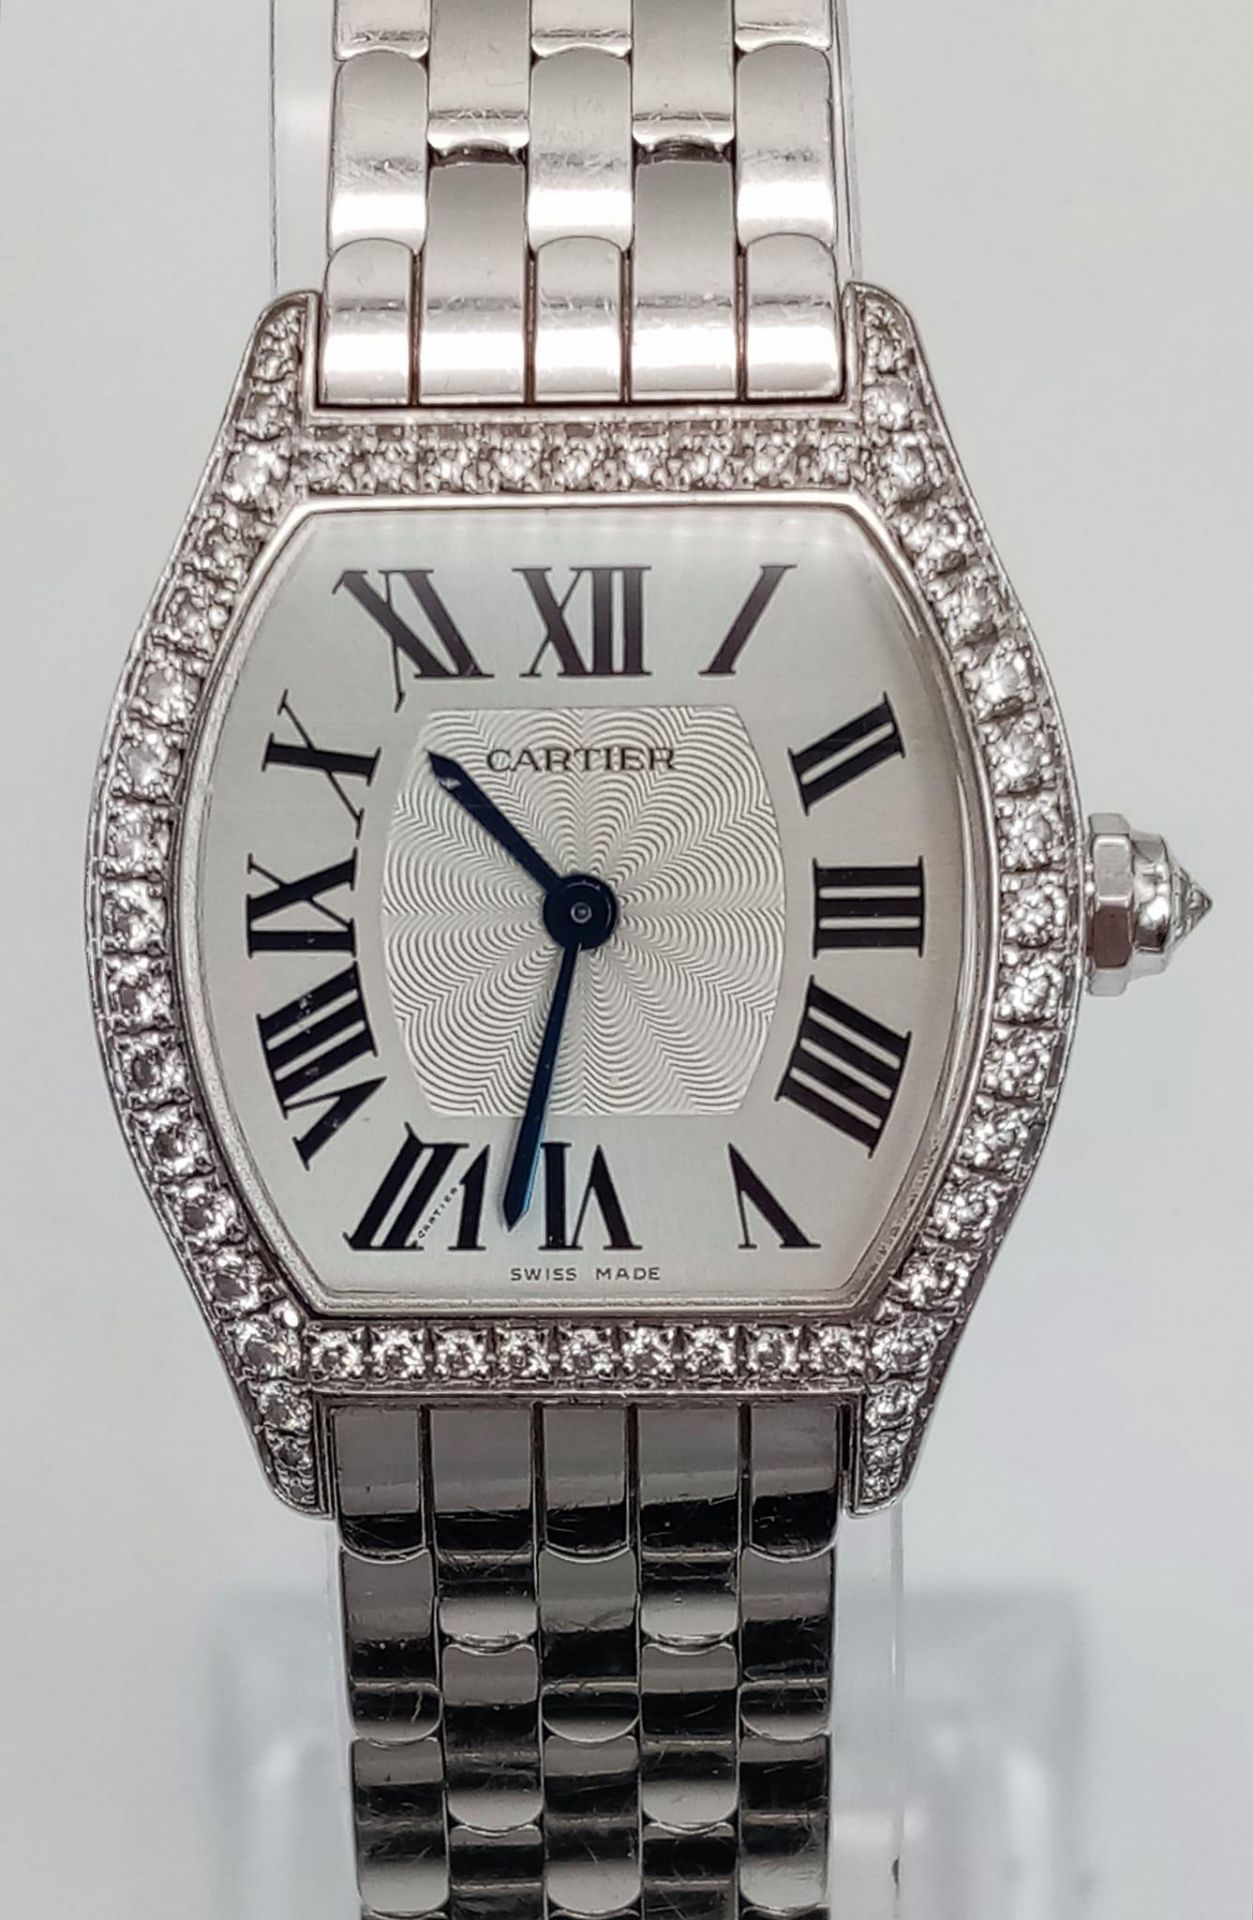 A Cartier Tortue 18K White Gold and Diamonds Ladies Watch. 18k white gold bracelet and case - 30mm x